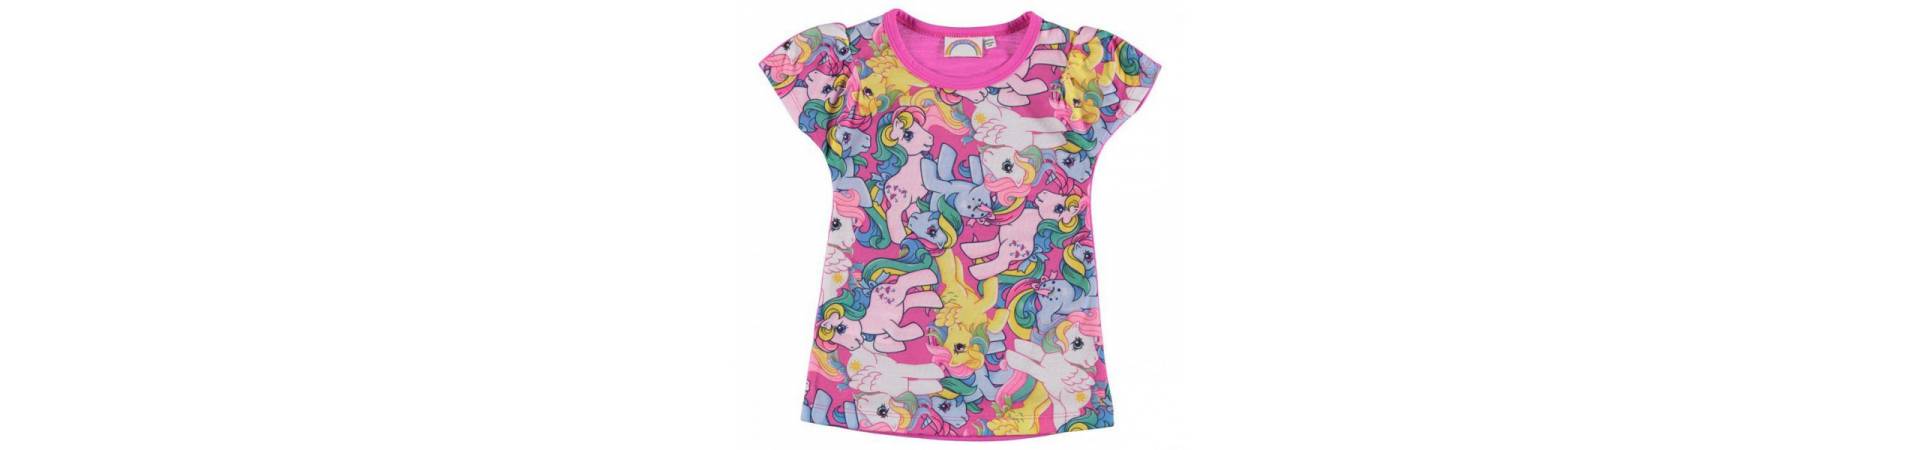 My Little Pony Clothes